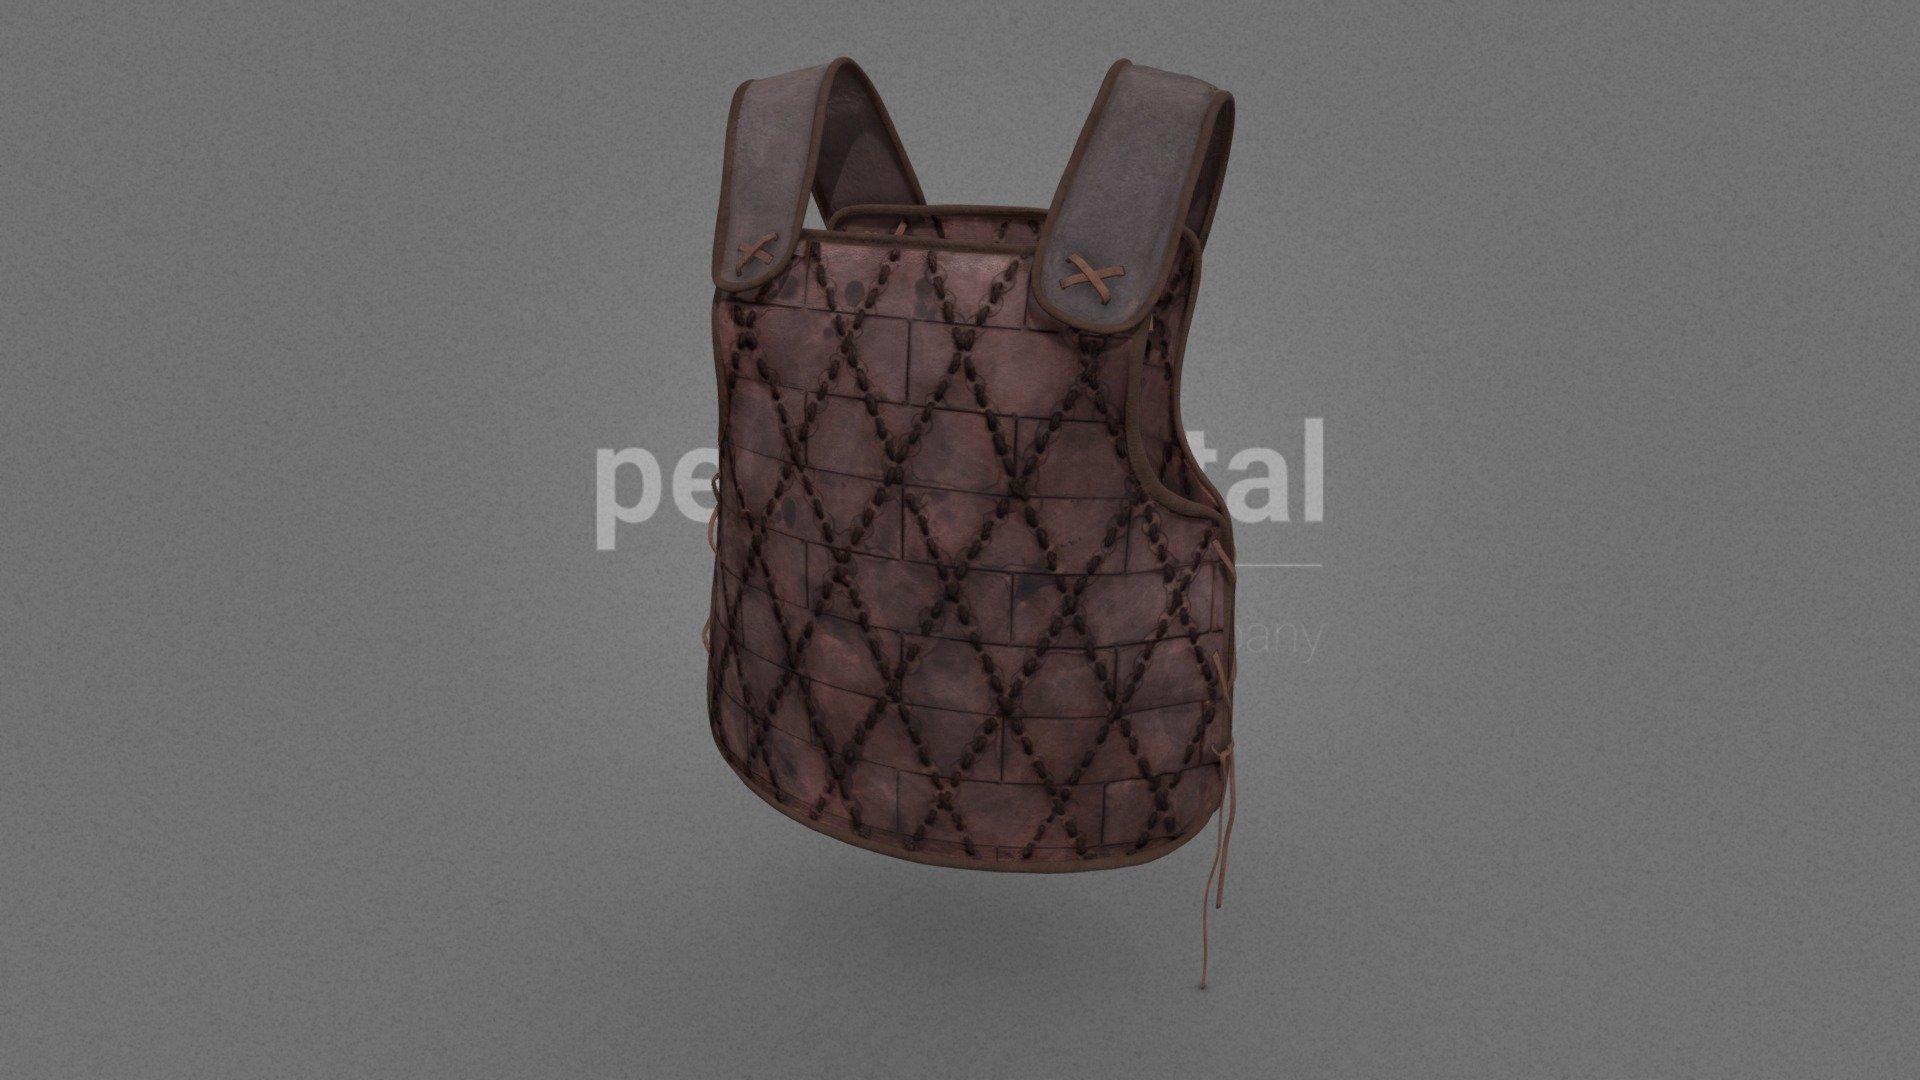 Leather cuirass armor

We are Peris Digital, and we make RAW meshes (Photogrammetry) and Digital Doubles.

This is a RAW mesh, taken by our photogrammetry team in our RIG with 144 Sony Alpha cameras.
Check our web, make your selection and contact us to get your costume scanned or talk with us to take a Demo RAW mesh to download it.

Contact: info@peris.costumes - Leather Cuirass 04 - 3D model by Peris Digital (@perisdigital) 3d model